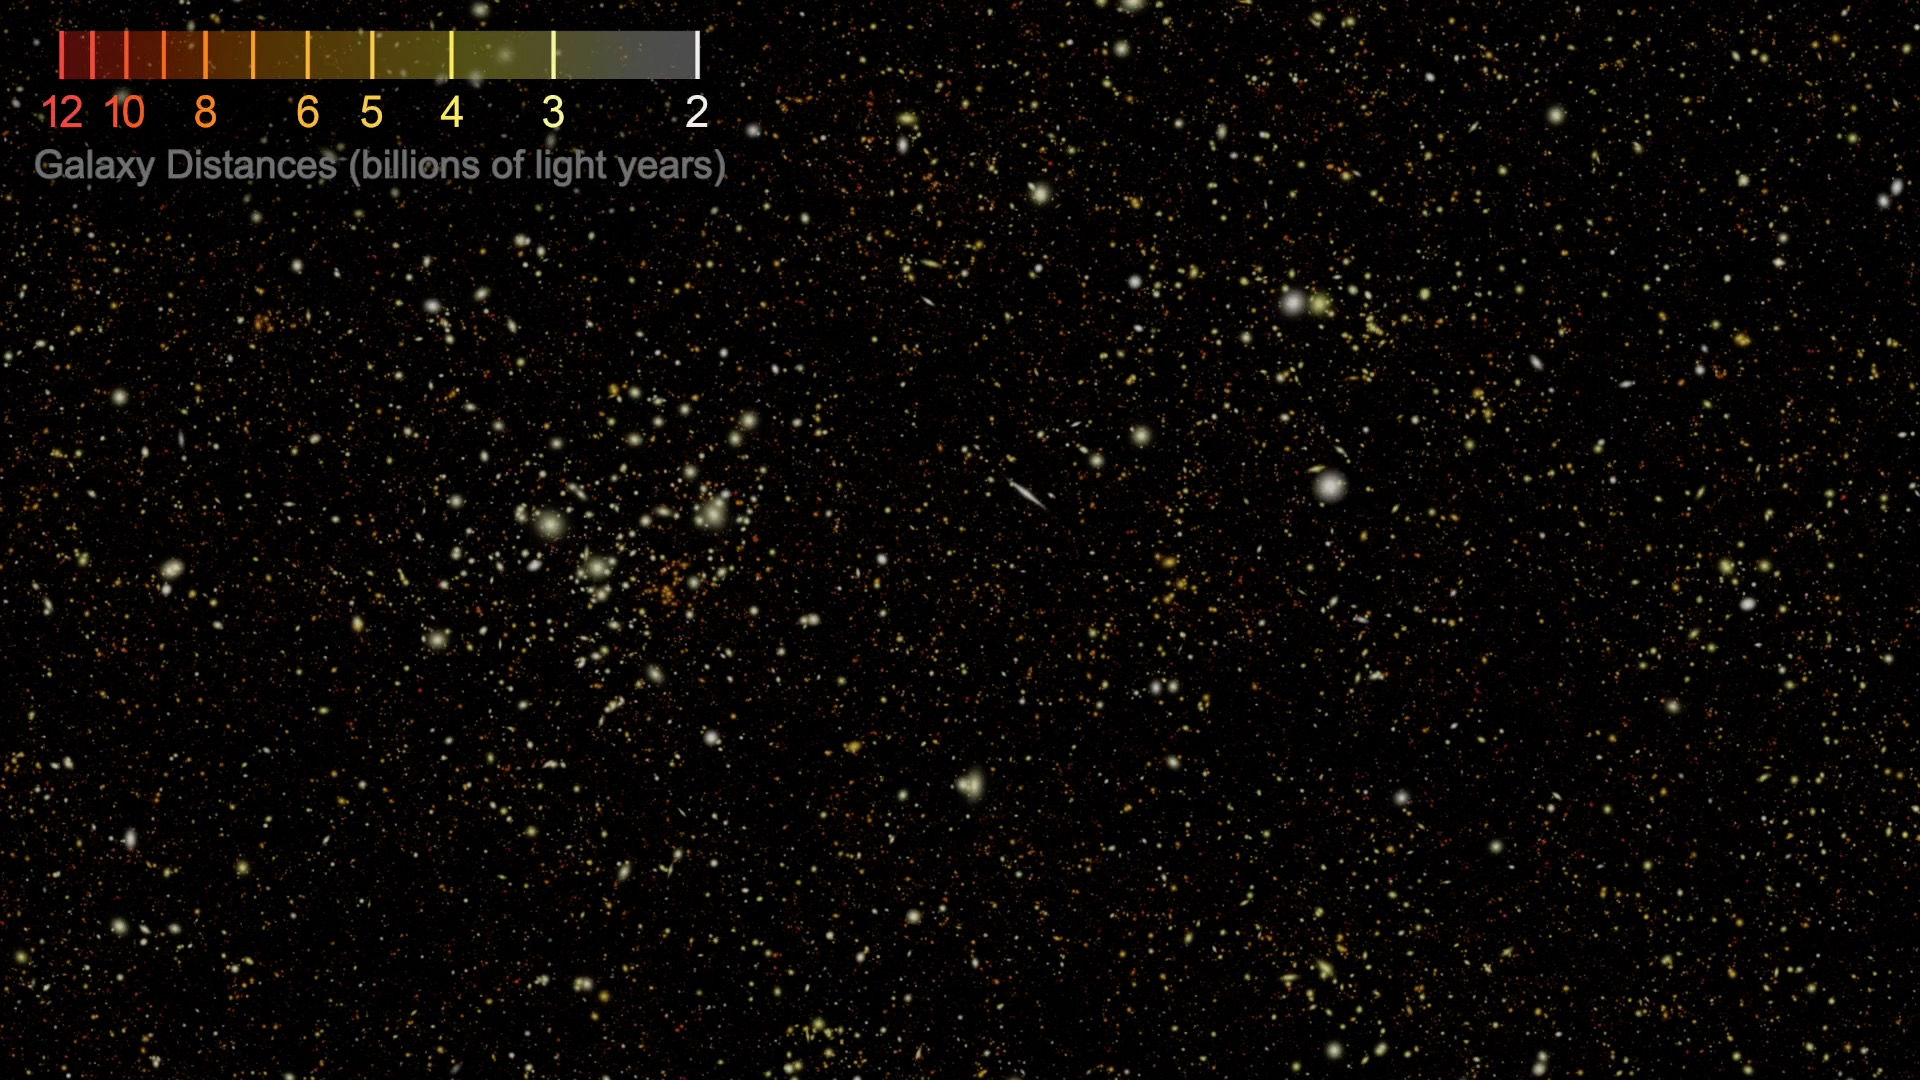 This video begins by showing the most distant galaxies in the simulated deep field image in red. As it zooms out, layers of nearer (yellow and white) galaxies are added to the frame. By studying different cosmic epochs, Roman will be able to trace the universe's expansion history, study how galaxies developed over time, and much more.Credit: Caltech-IPAC/R. Hurt and M. Troxel